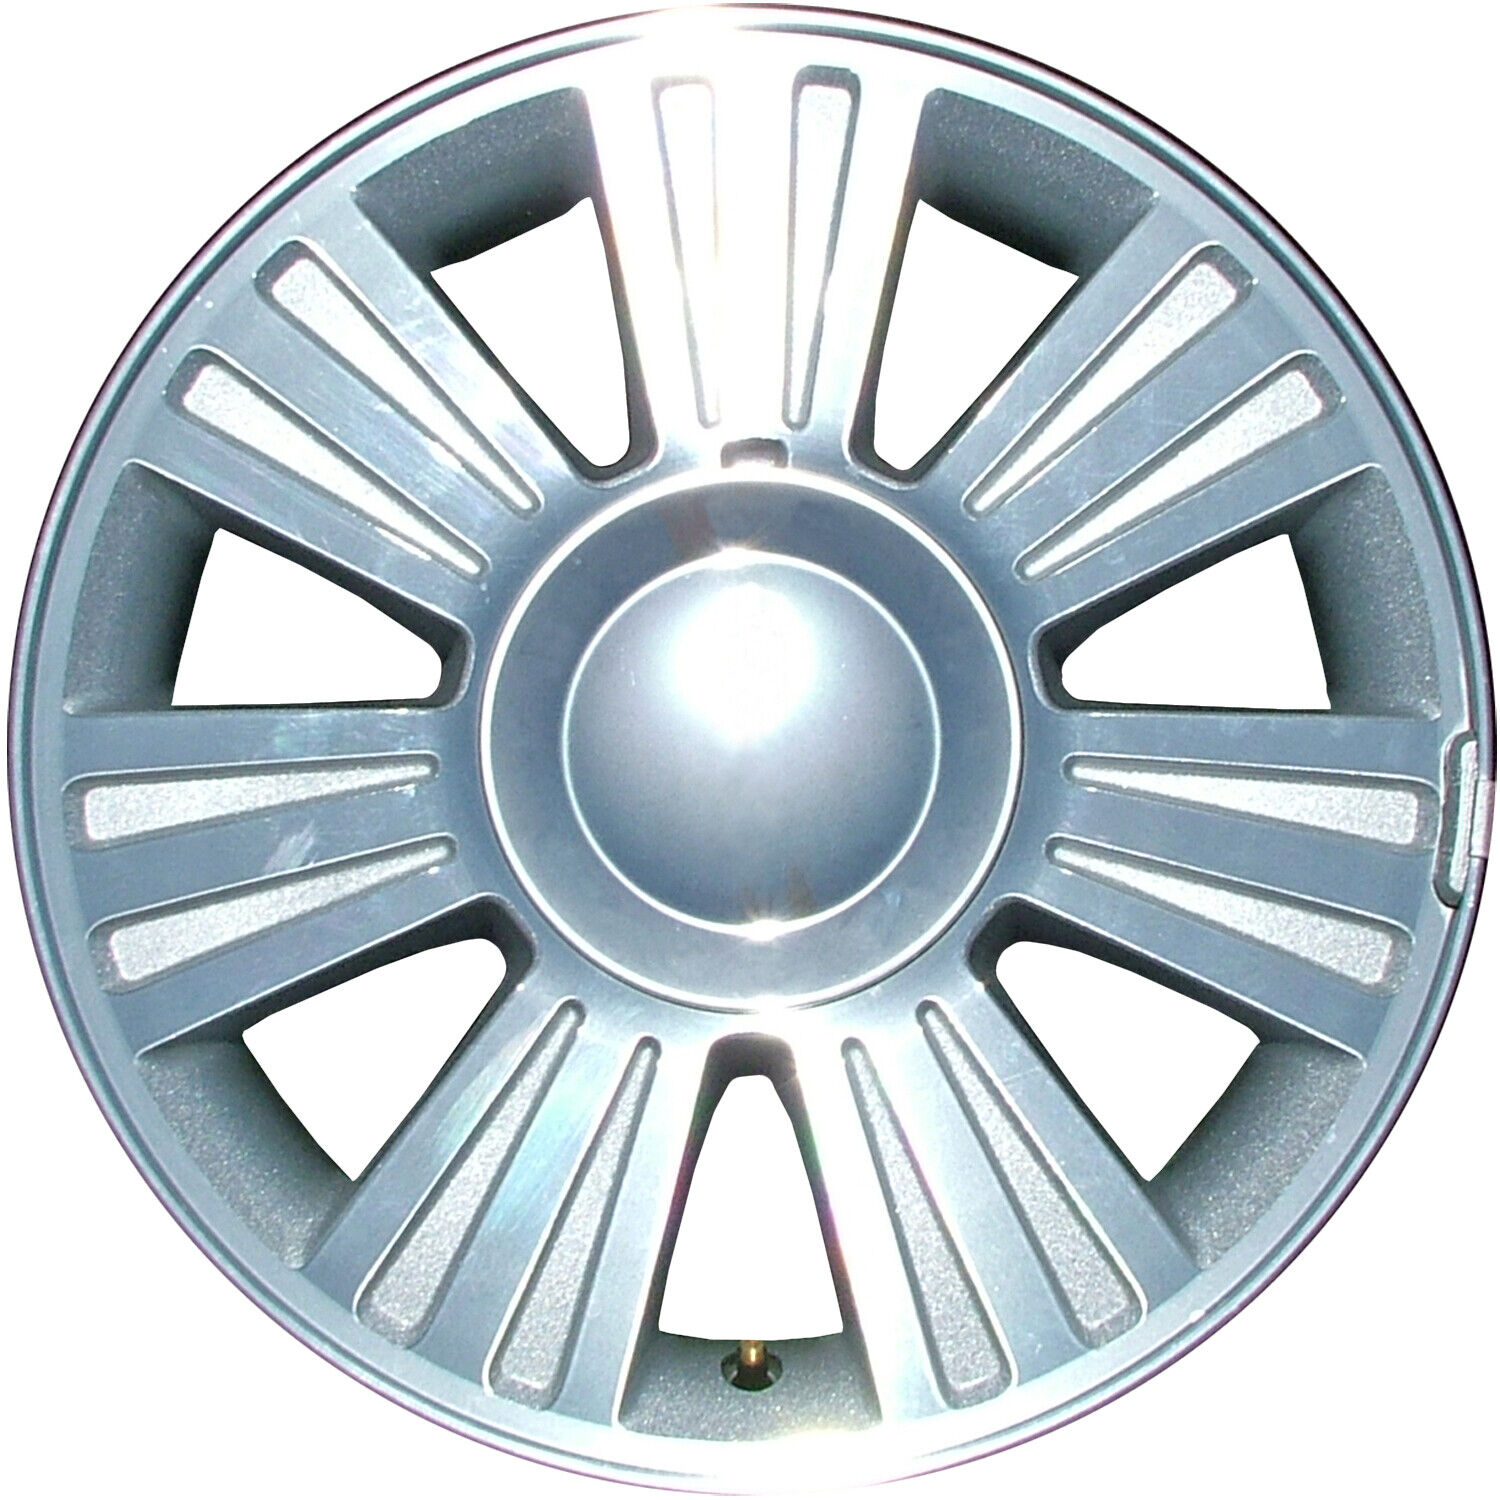 03665 Reconditioned OEM Aluminum Wheel 18x8.5 fits 2007-2013 Lincoln Navigator